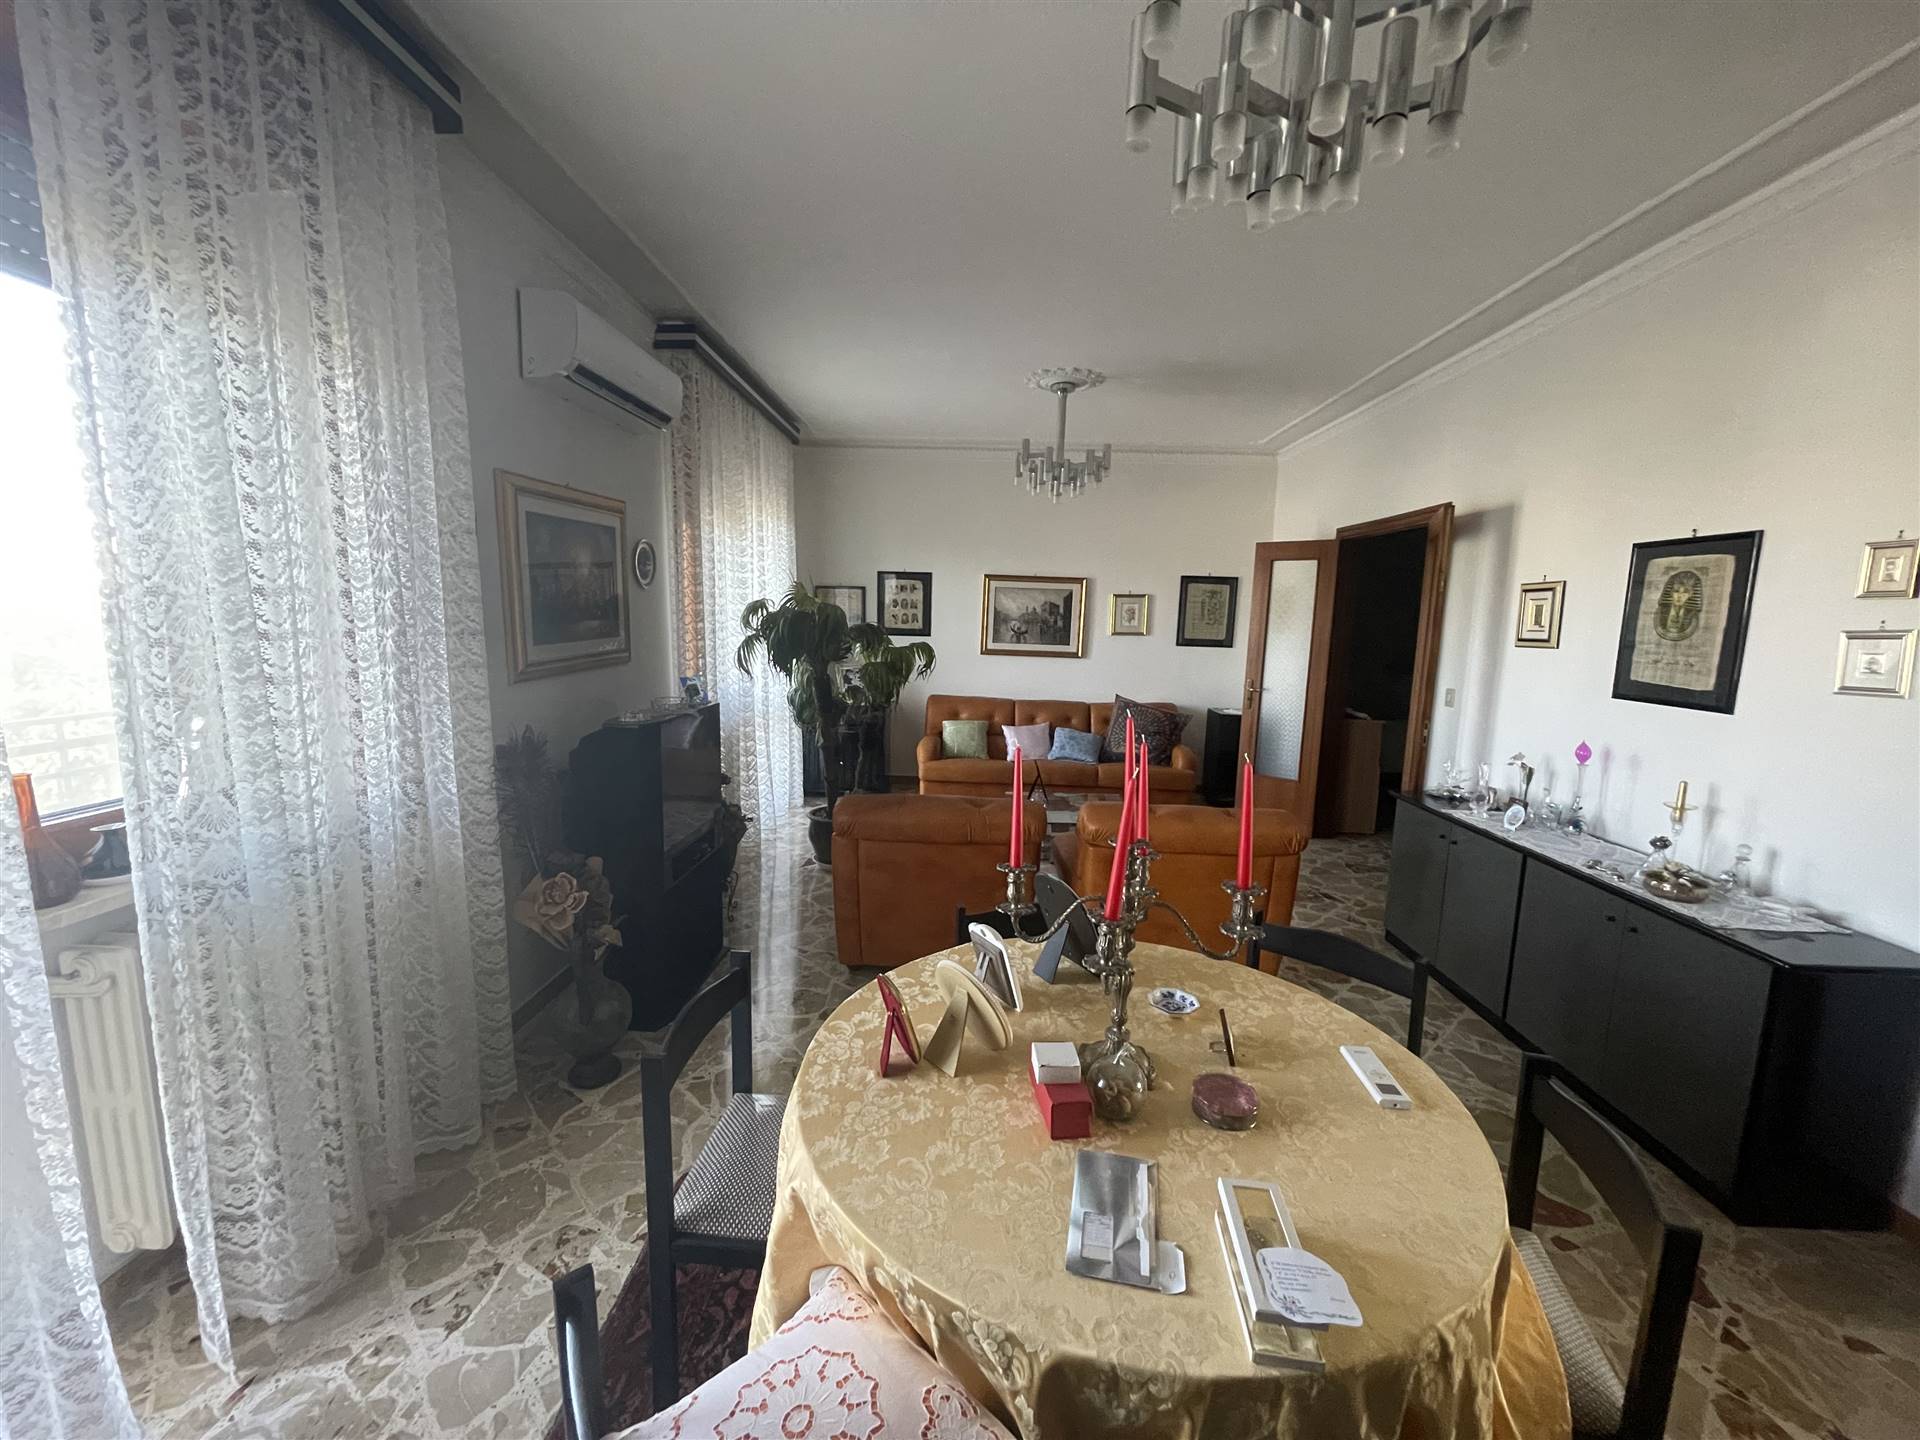 EST, LECCE, Apartment for sale of 152 Sq. mt., Habitable, Heating Individual heating system, Energetic class: F, Epi: 83,2959 kwh/m2 year, placed at 